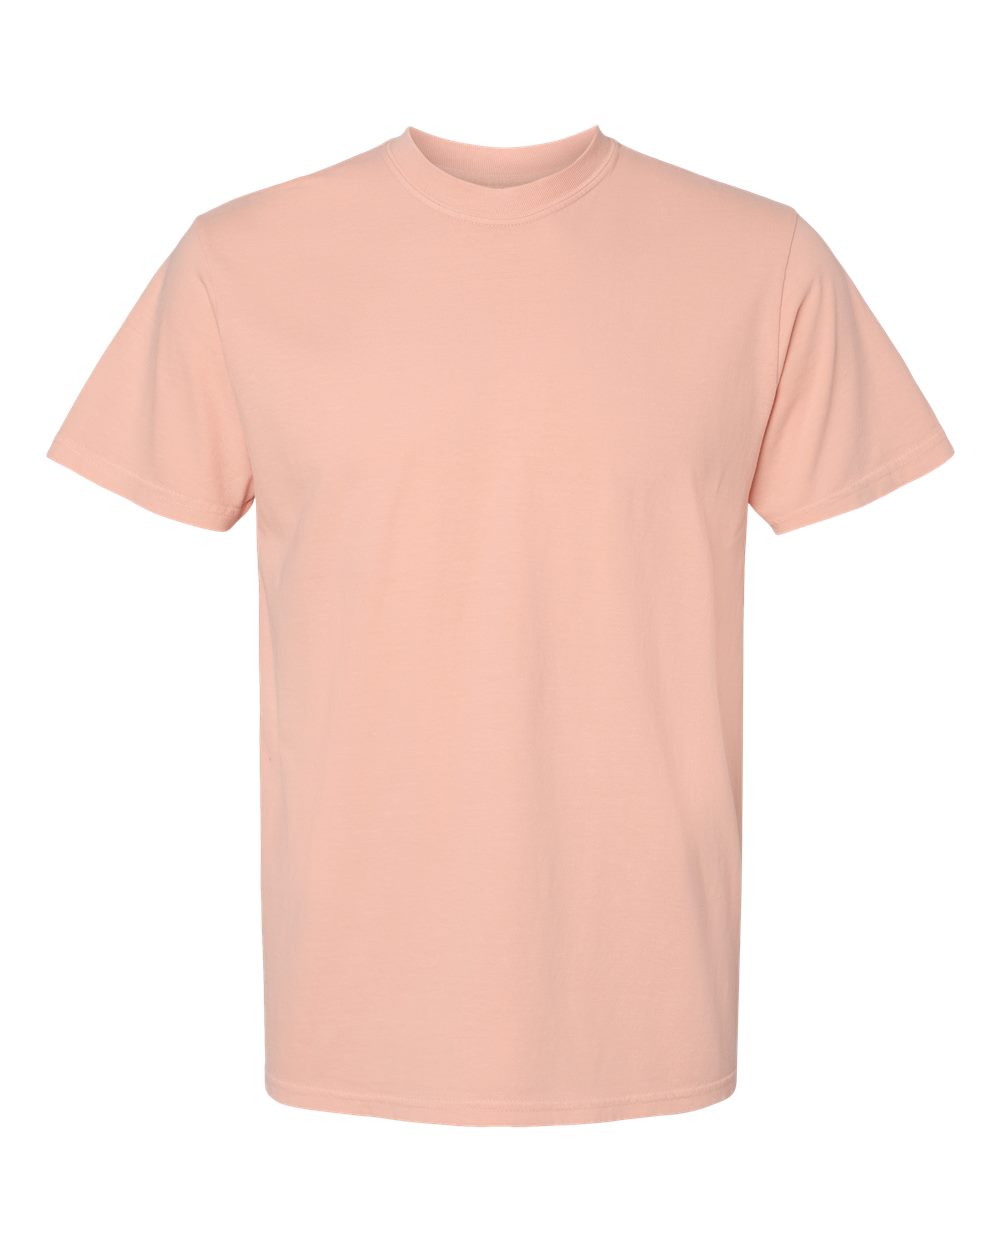 Comfort Colors Garment-Dyed Tee (1717) in Peachy